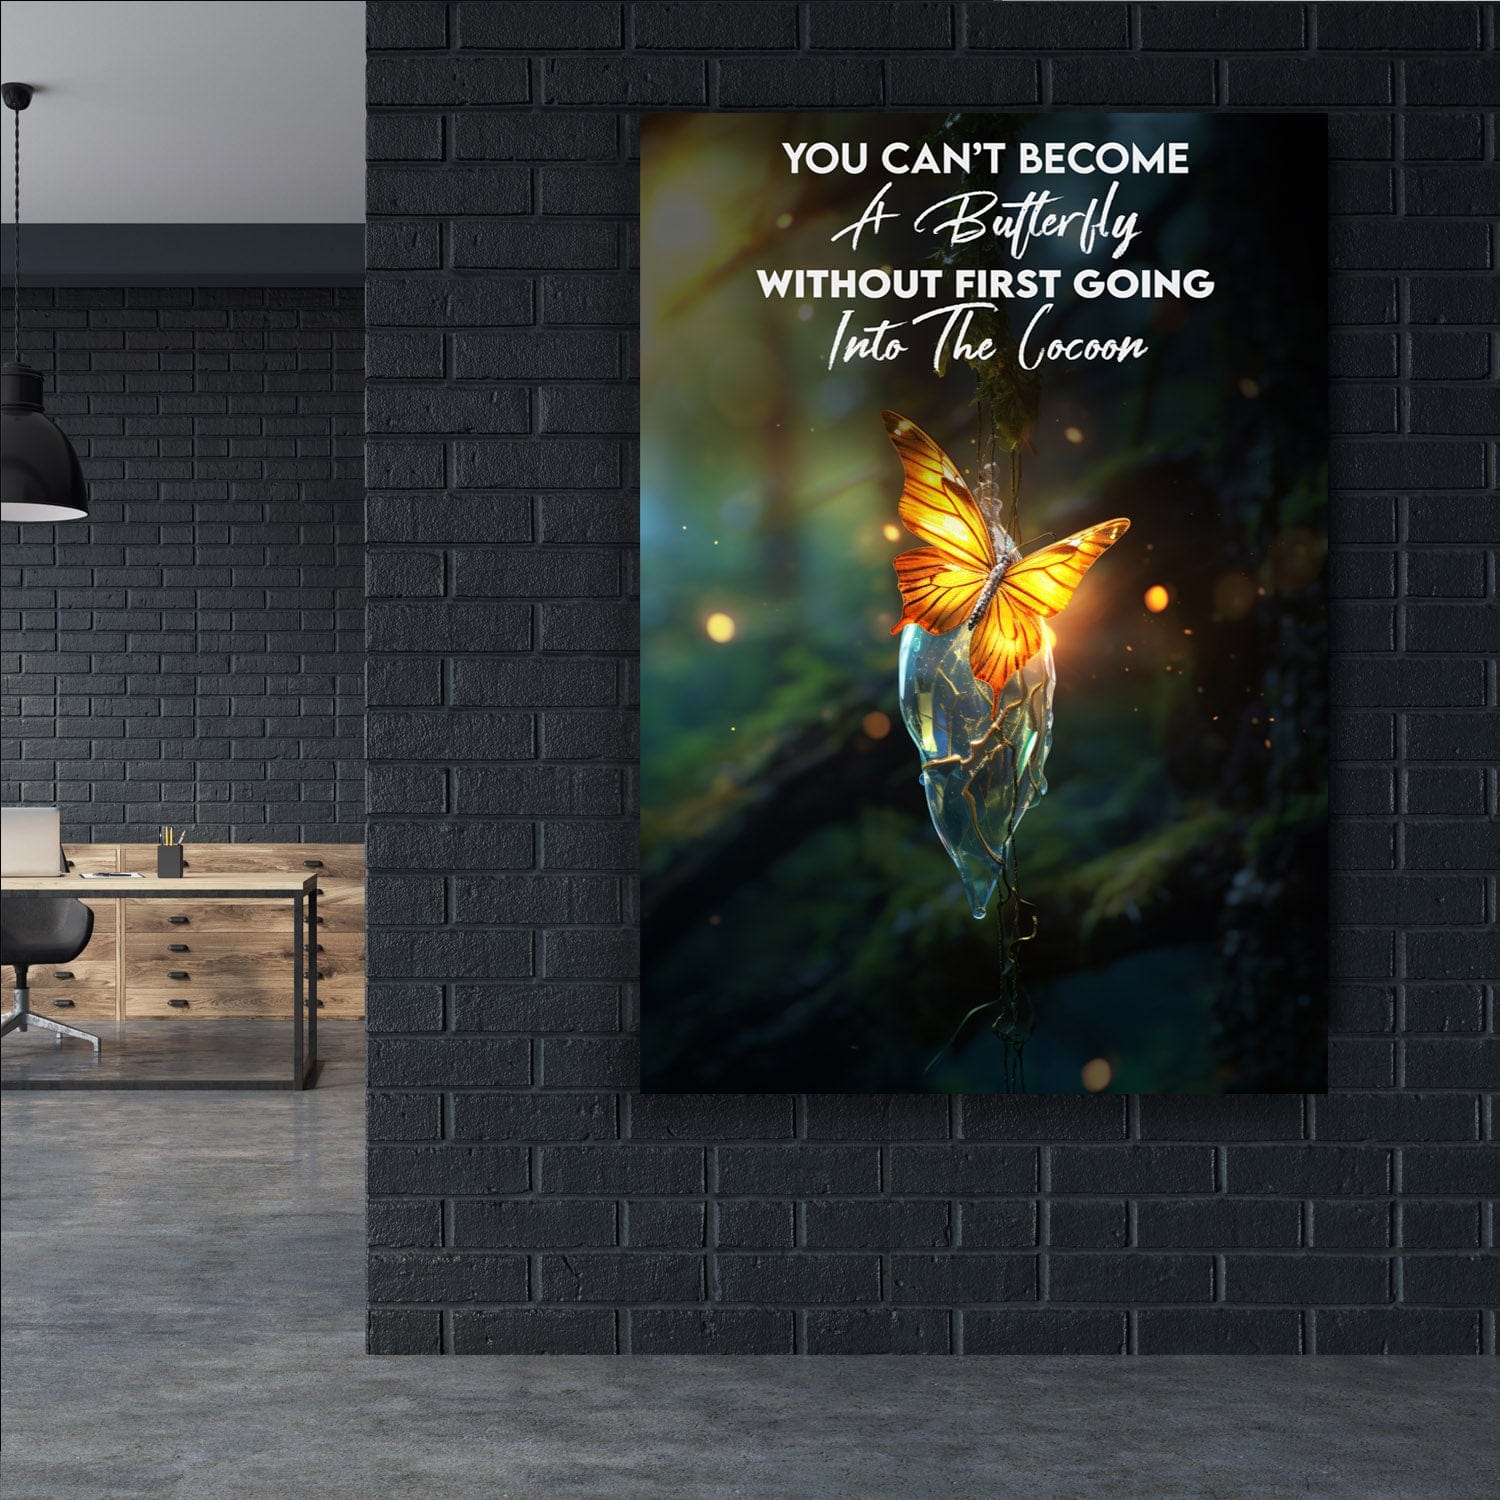 Butterfly Going Into the Cocoon Wall Art | Inspirational Wall Art Motivational Wall Art Quotes Office Art | ImpaktMaker Exclusive Canvas Art Portrait